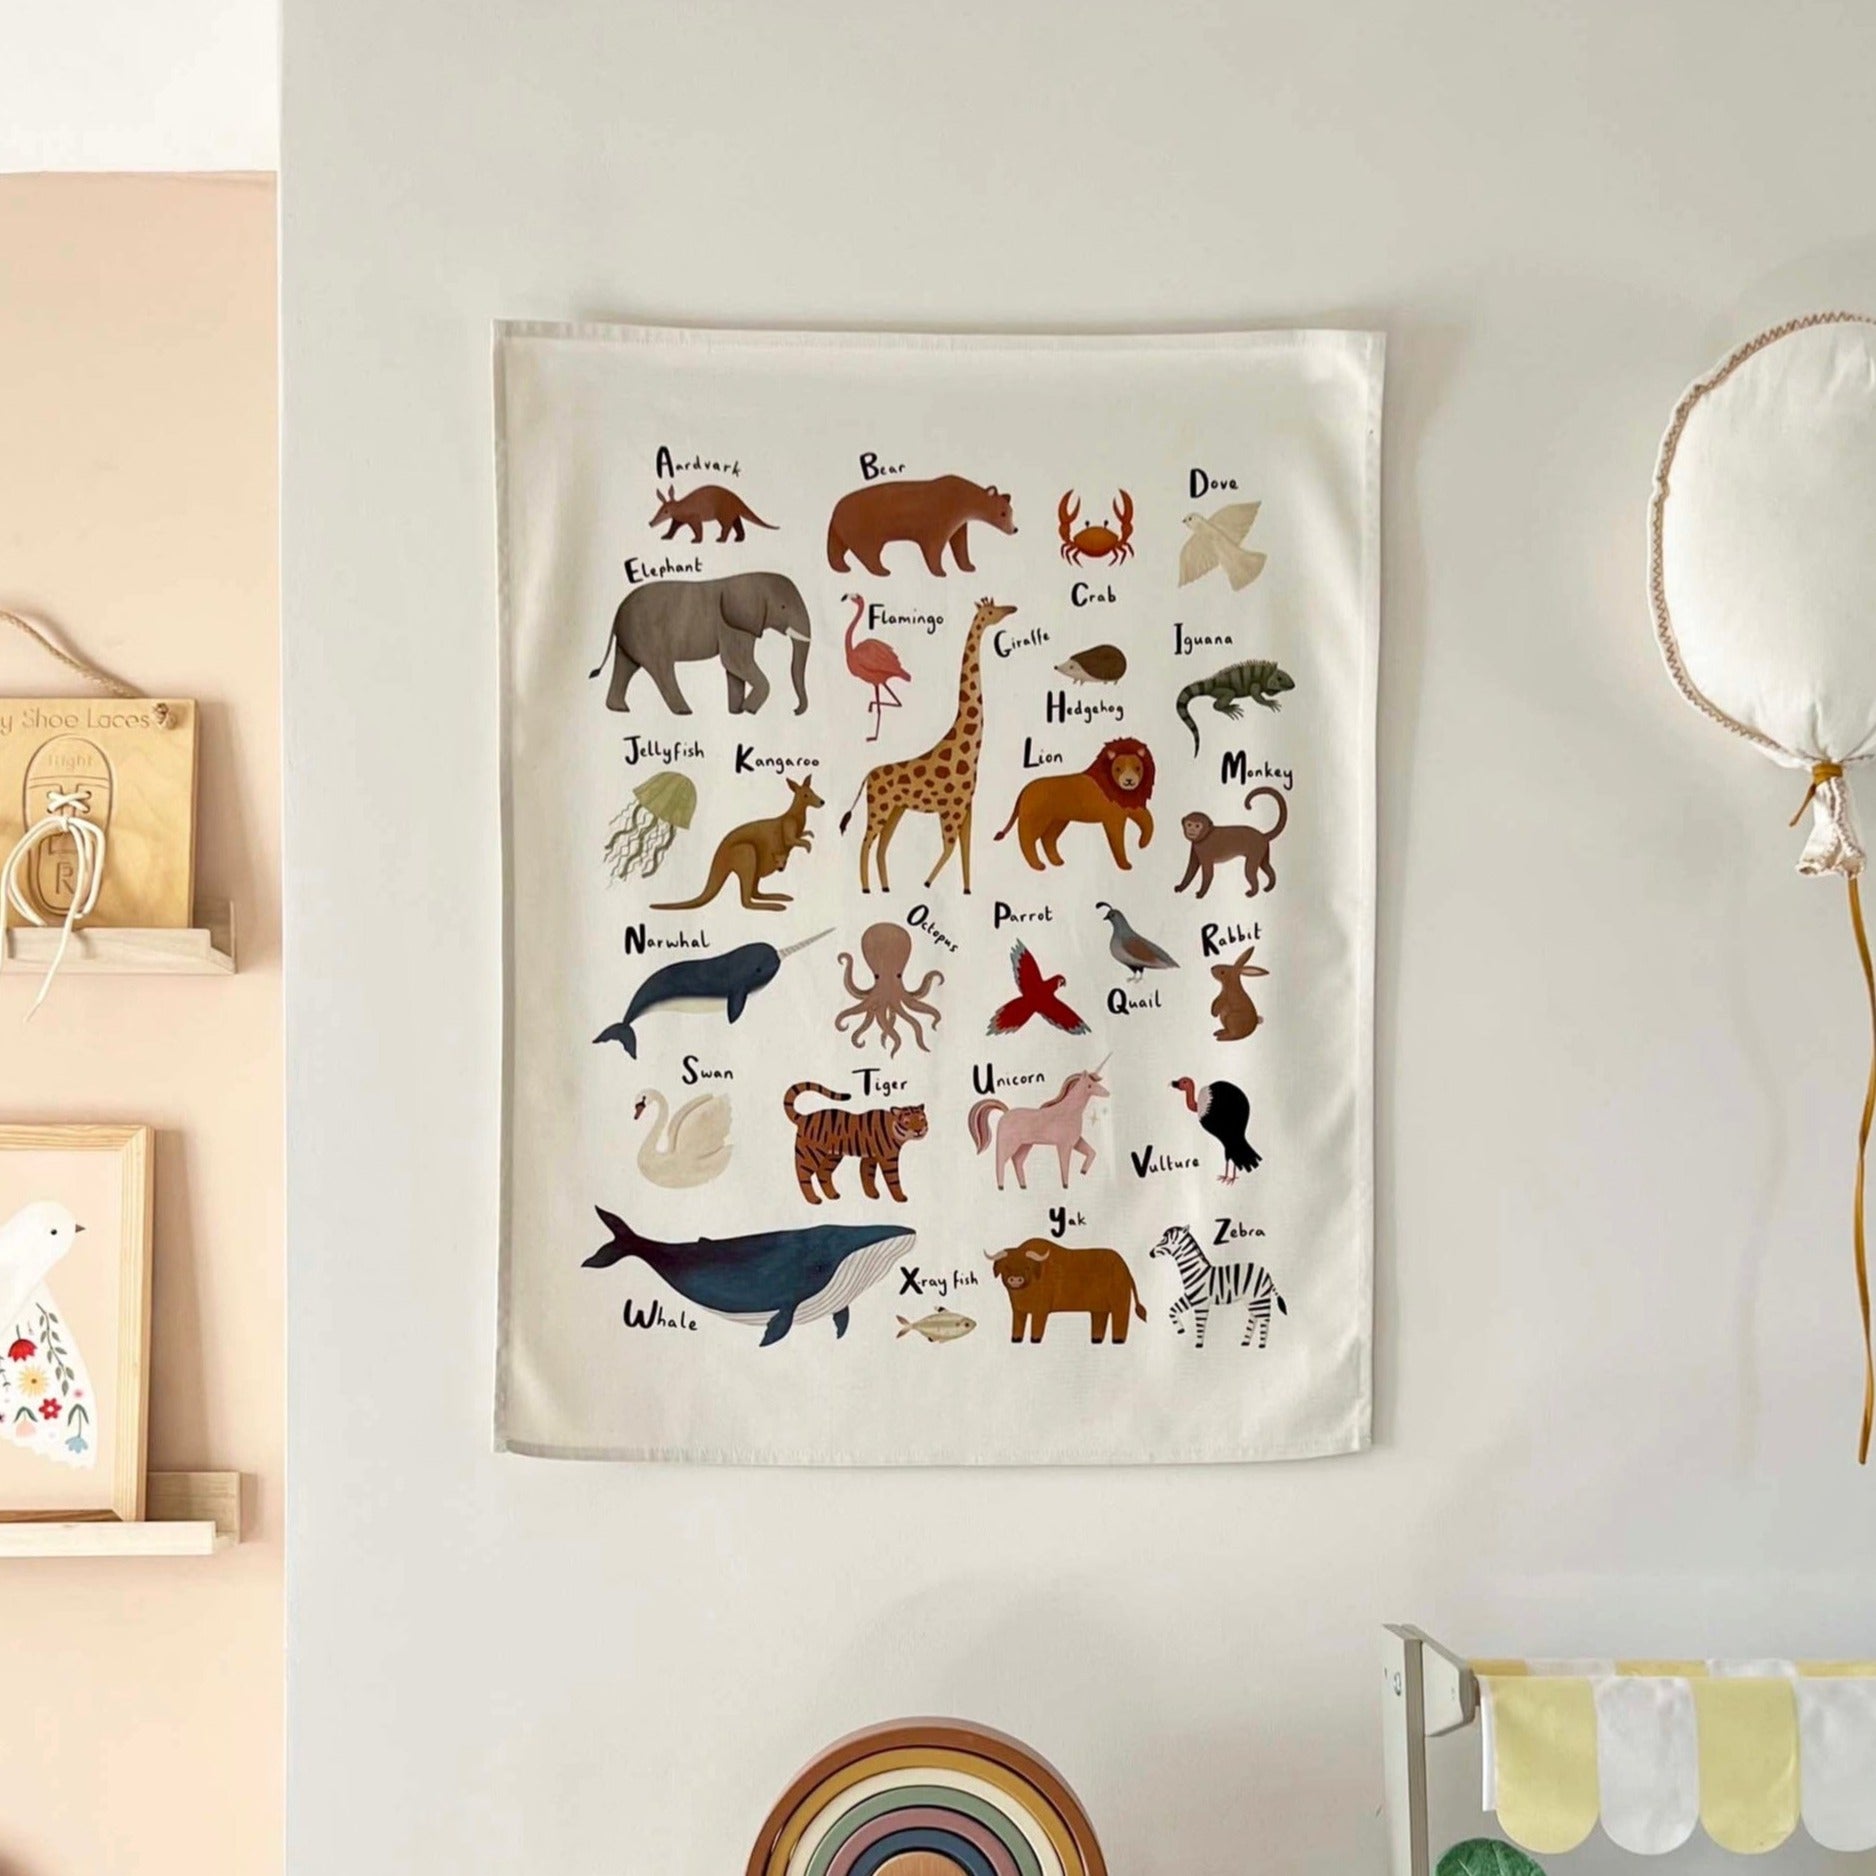 Animal Alphabet Wall Hanging by Kid of the Village